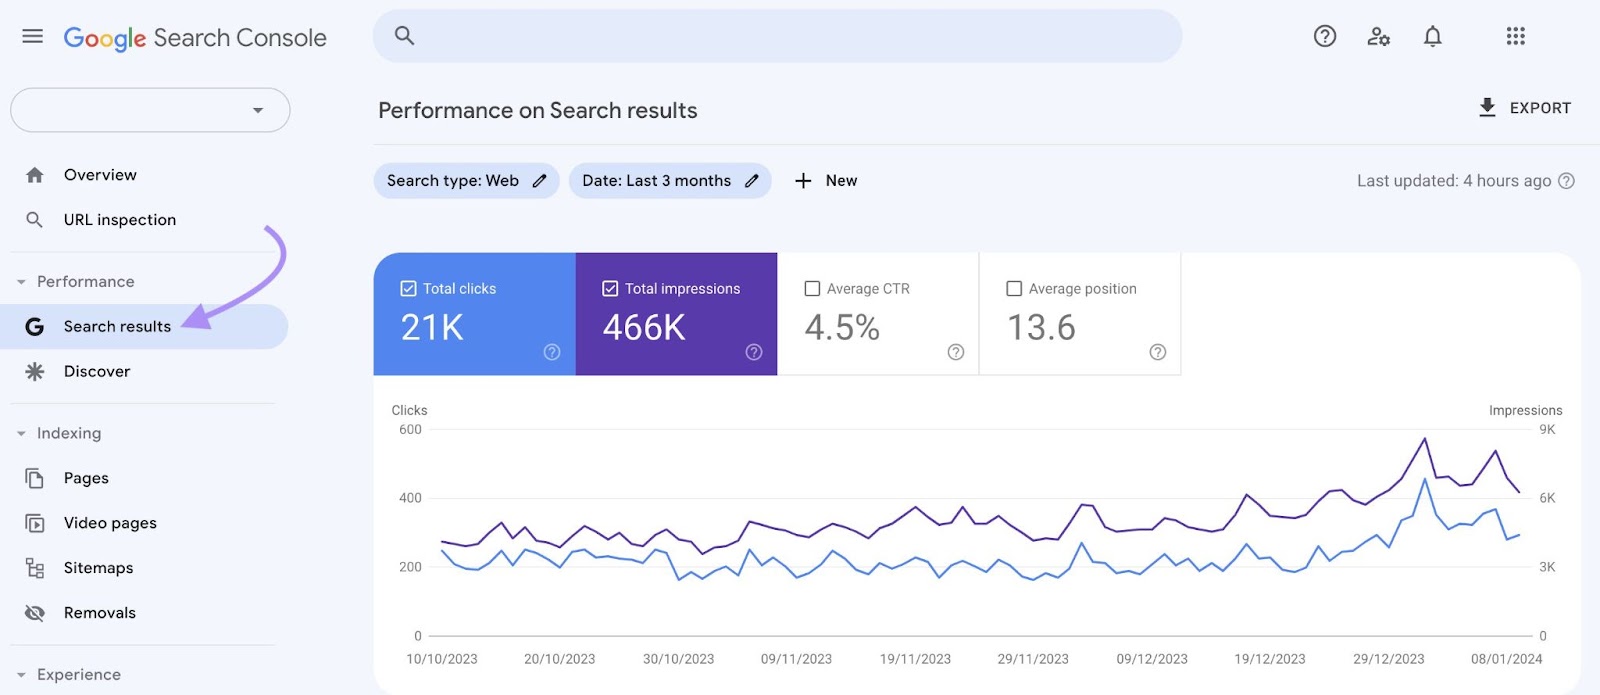 "Performance on Search results" graph in Google Search Console